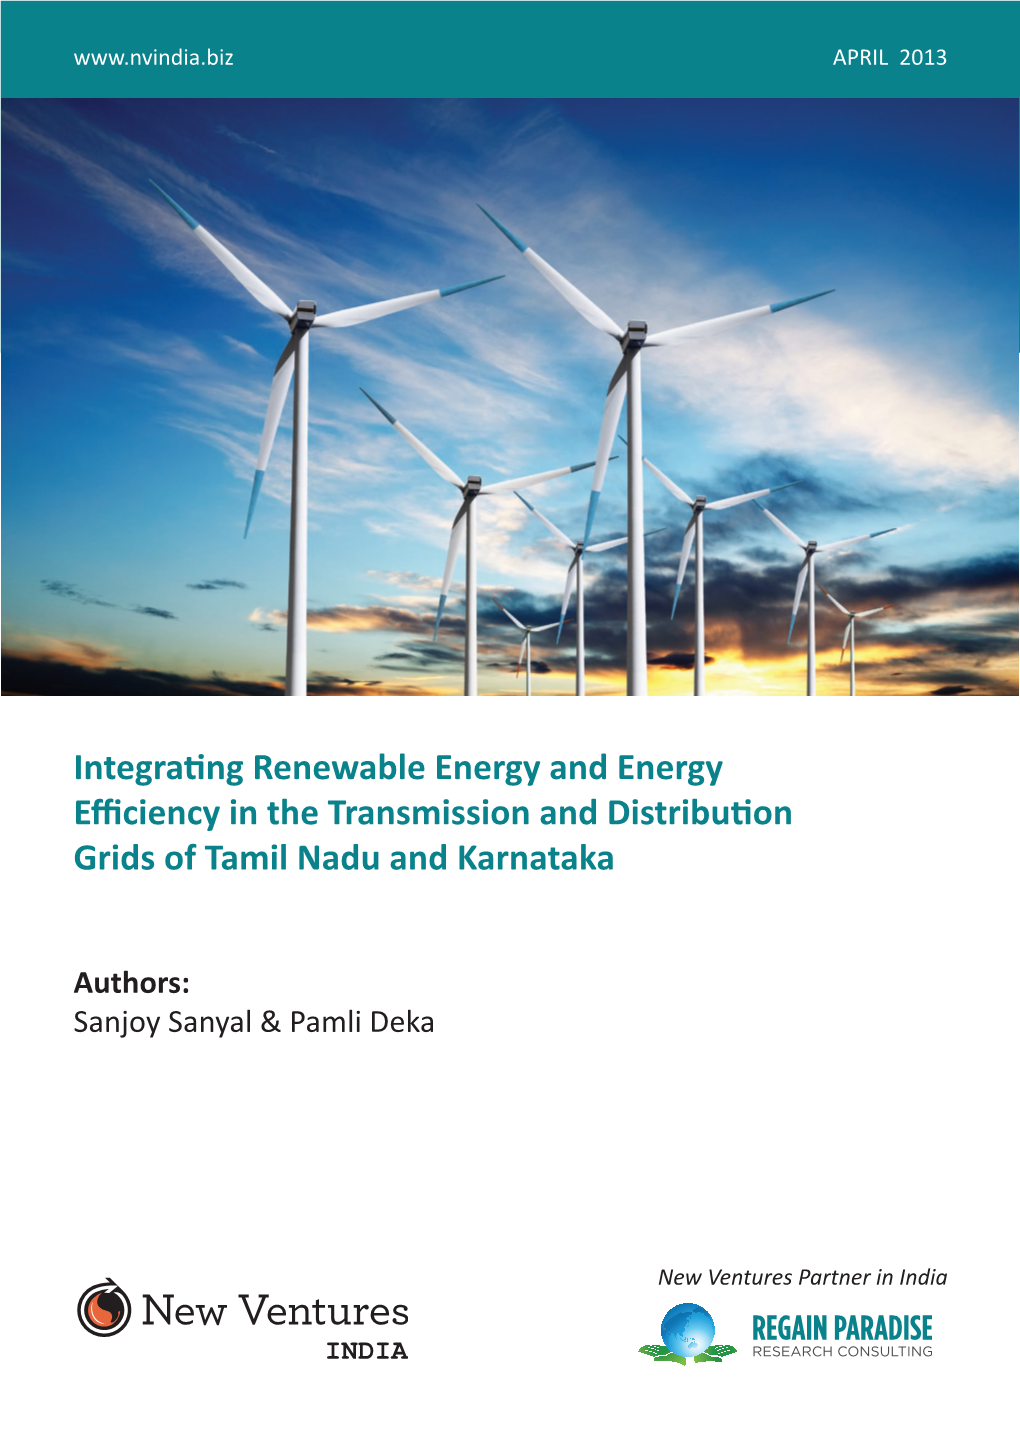 Integrating Renewable Energy and Energy Efficiency in the Transmission and Distribution Grids of Tamil Nadu and Karnataka